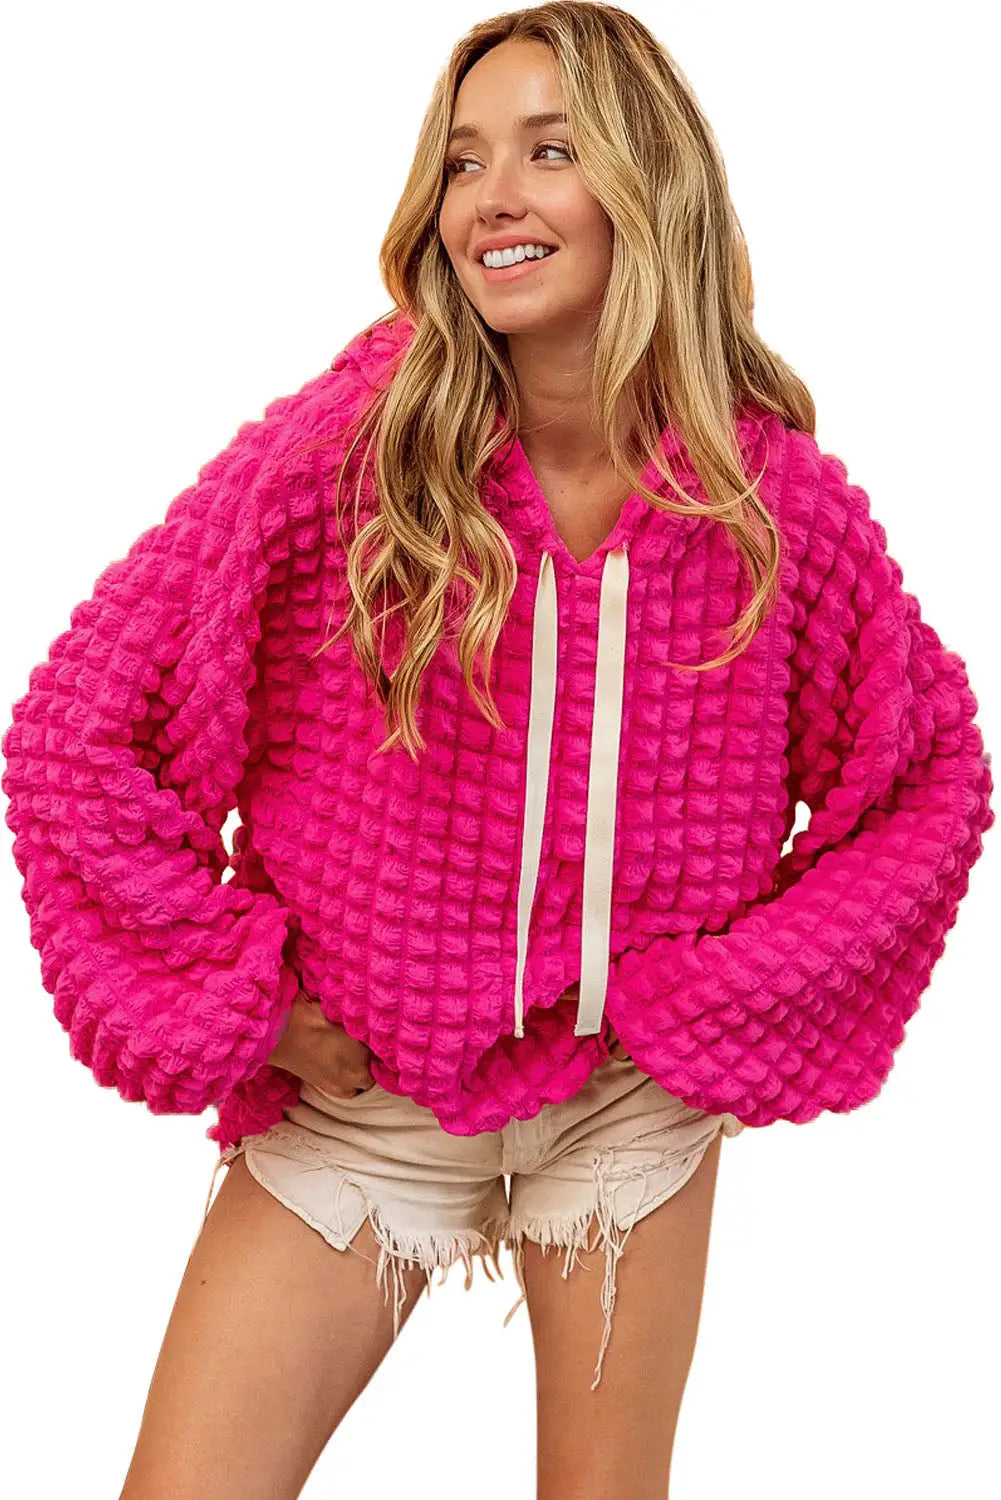 Rose bubble textured waffle hoodie - tops